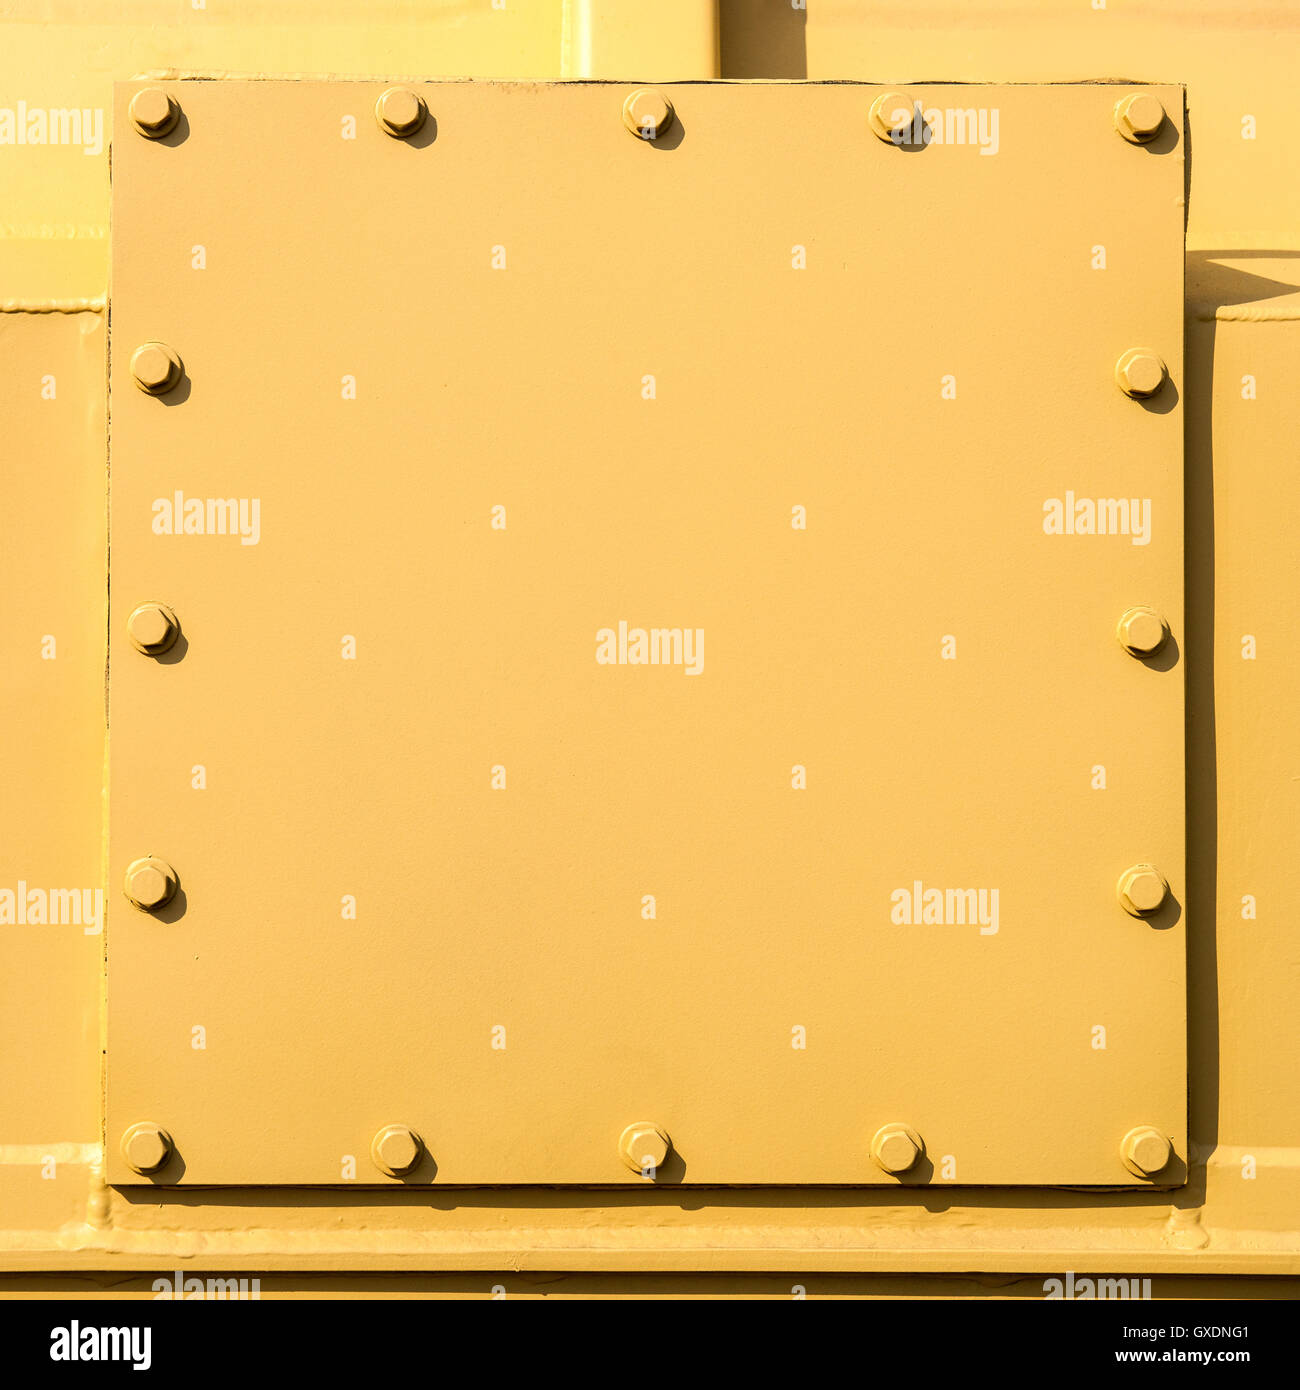 Welded and bolted metal plates painted with yellow colors. Closeup view. Free square shape space to enter a text. Stock Photo